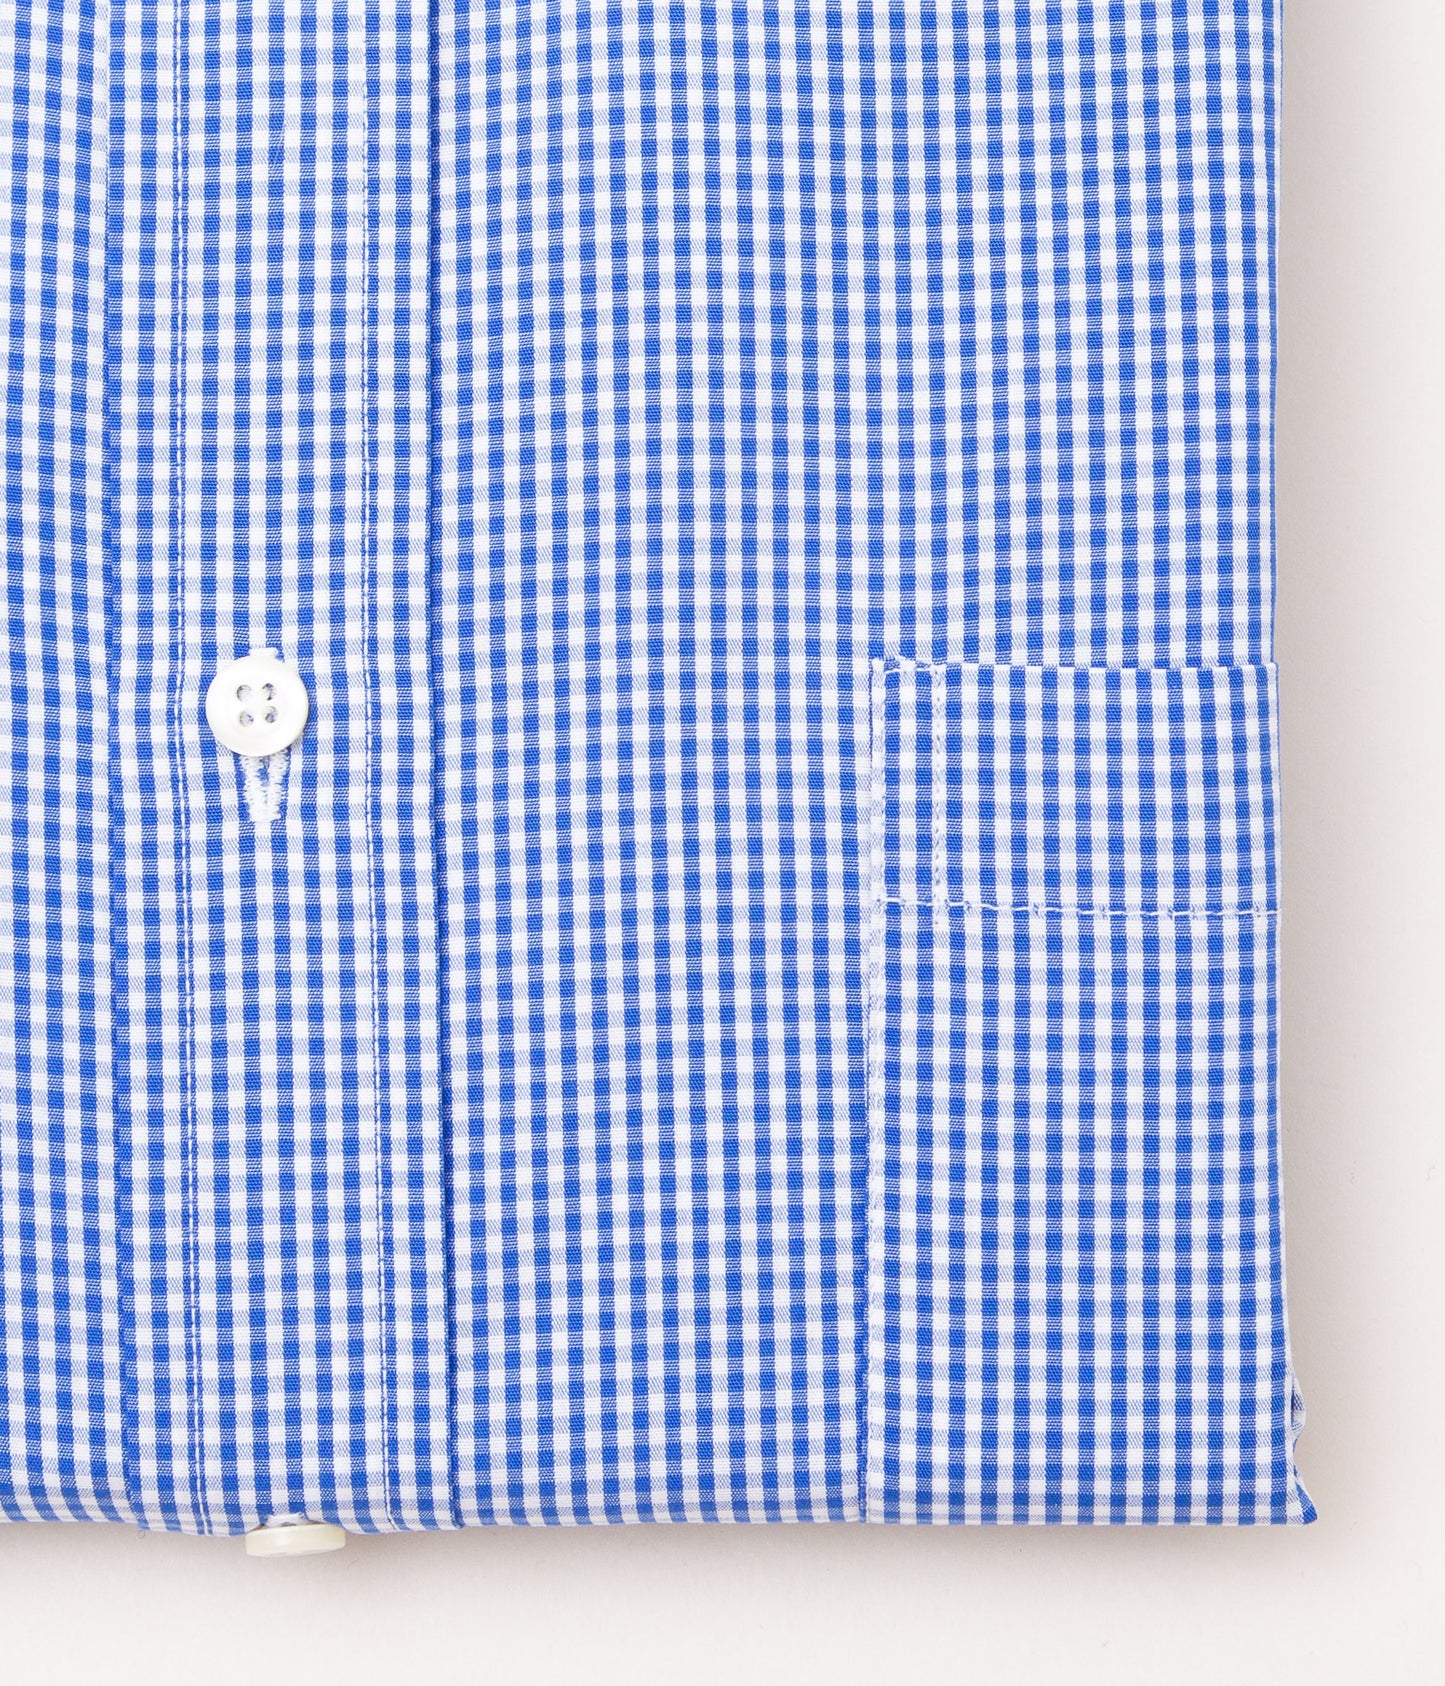 INDIVIDUALIZED SHIRTS "CLASSIC GINGHAM (CLASSIC FIT BUTTON DOWN SHIRT)"(BLUE)